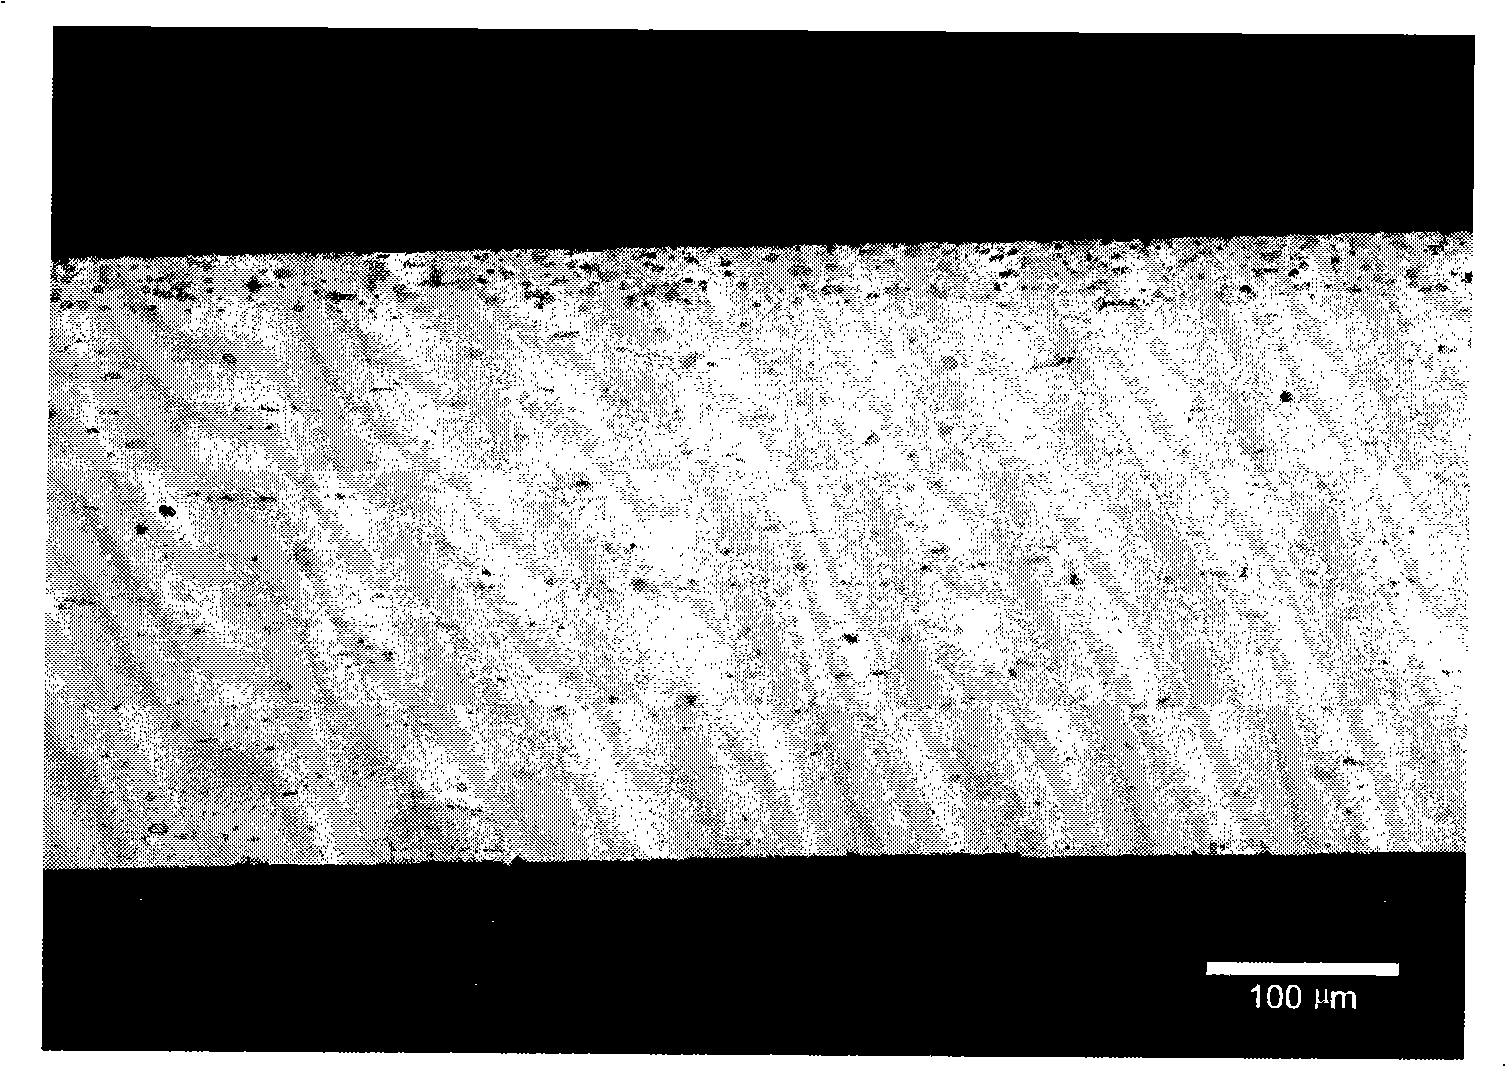 High performance aluminum alloy composite foil for heat converter and method of manufacture